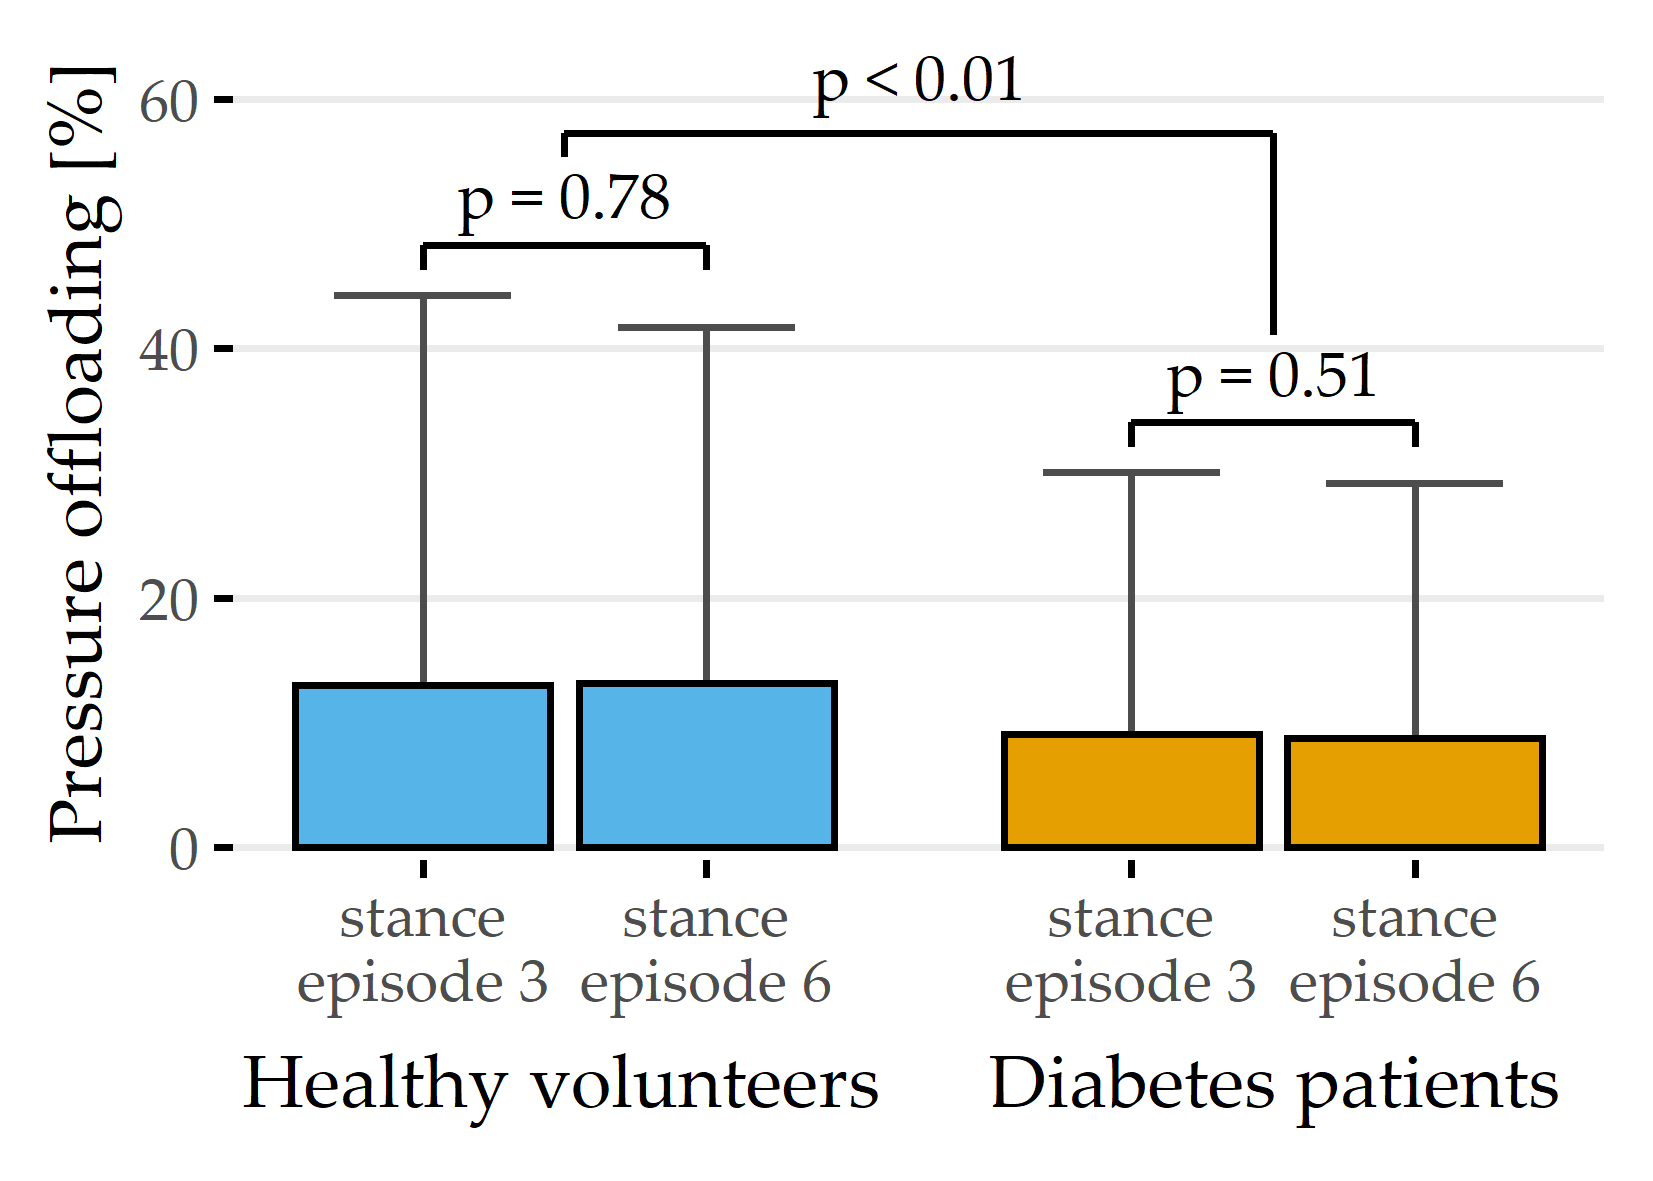 Average percentage of recordings without pressure application during 20-minute standing episodes. Intermittent pressure release in diabetes patients with neuropathy occurs less frequently than in healthy controls. The underlying dataset is from our previous publication [31] where 114 propensity-score matched observations (57 from volunteers, 57 from diabetes patients) are analyzed. For intra- and inter-group statistical comparison, a two-sided Student’s t-test is used. The figure is adapted from [31].